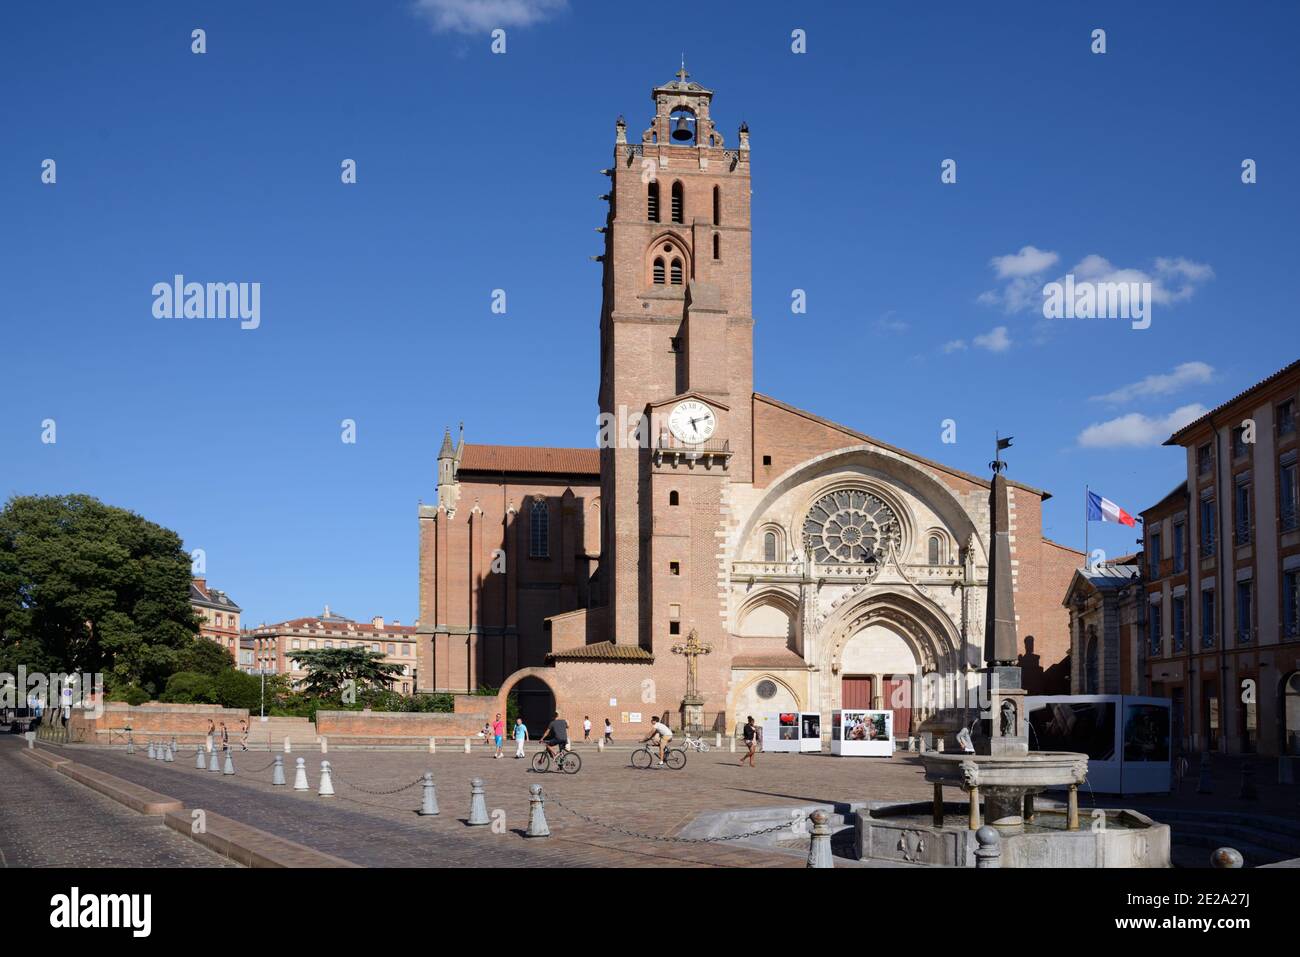 Romanesque & Gothic Toulouse Cathedral, Cathedral of Saint Stephen or Cathédrale Saint-Etienne & Place Saint-Etienne Toulouse France Stock Photo